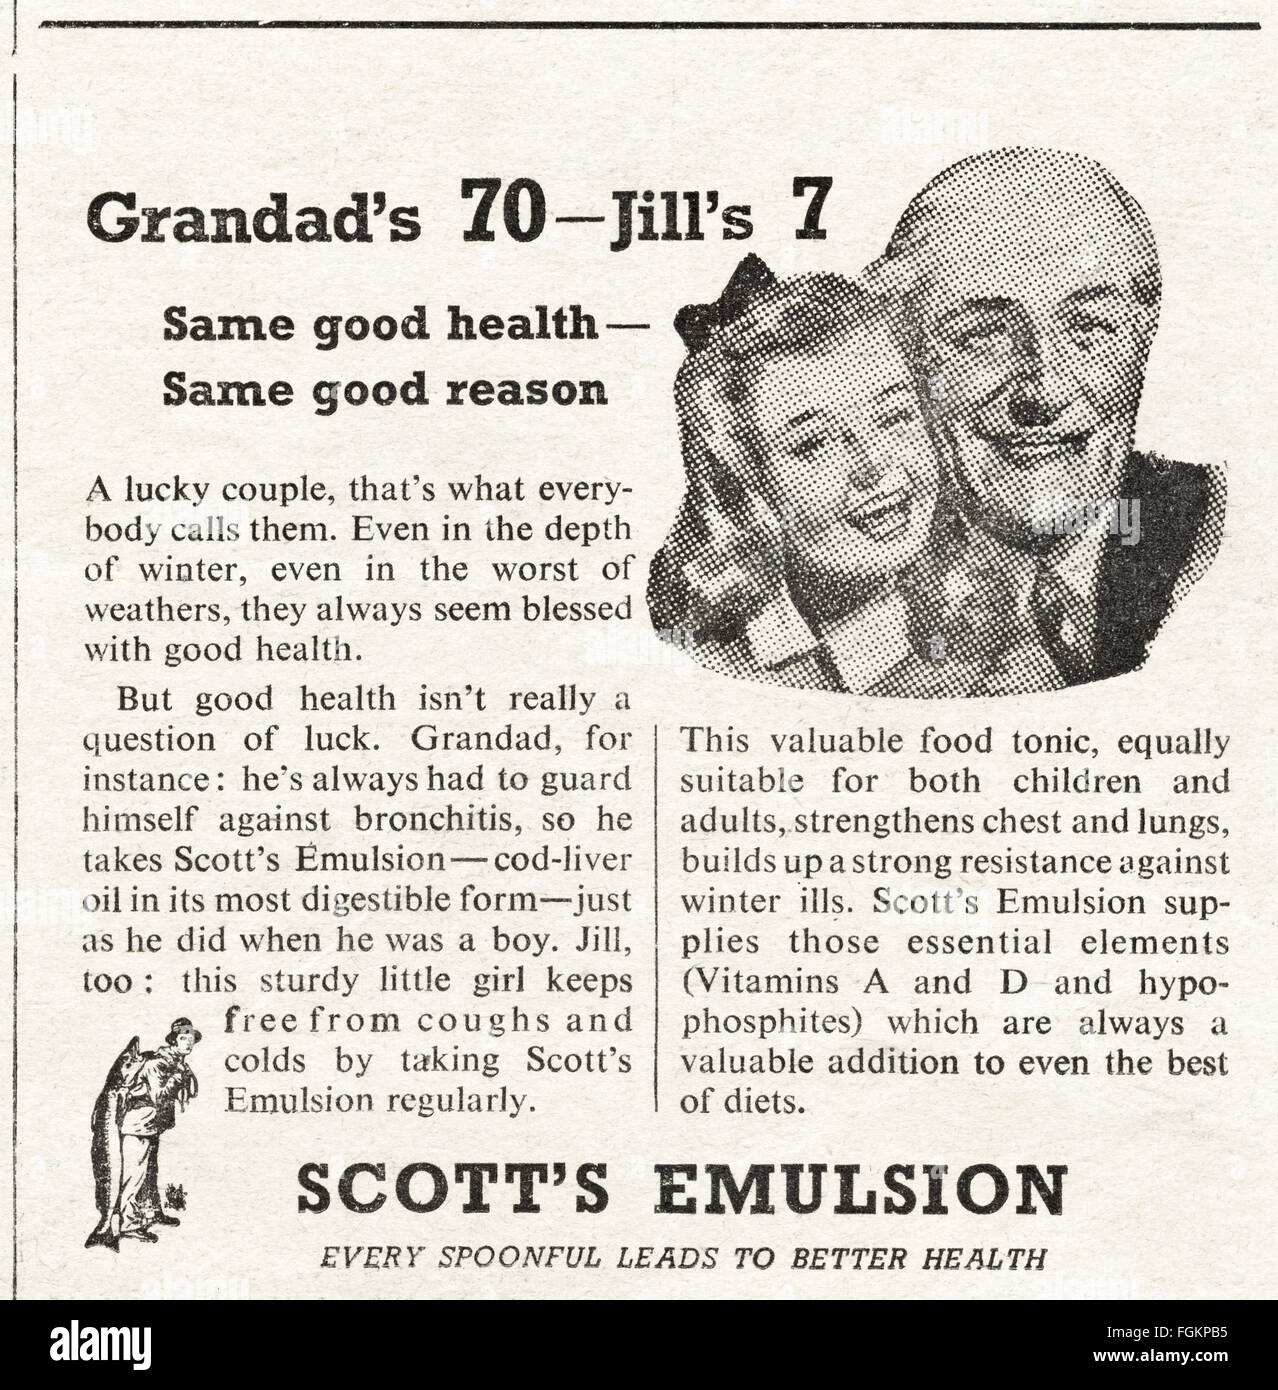 This advertisement for Scott's Emulsion of Cod Liver Oil features